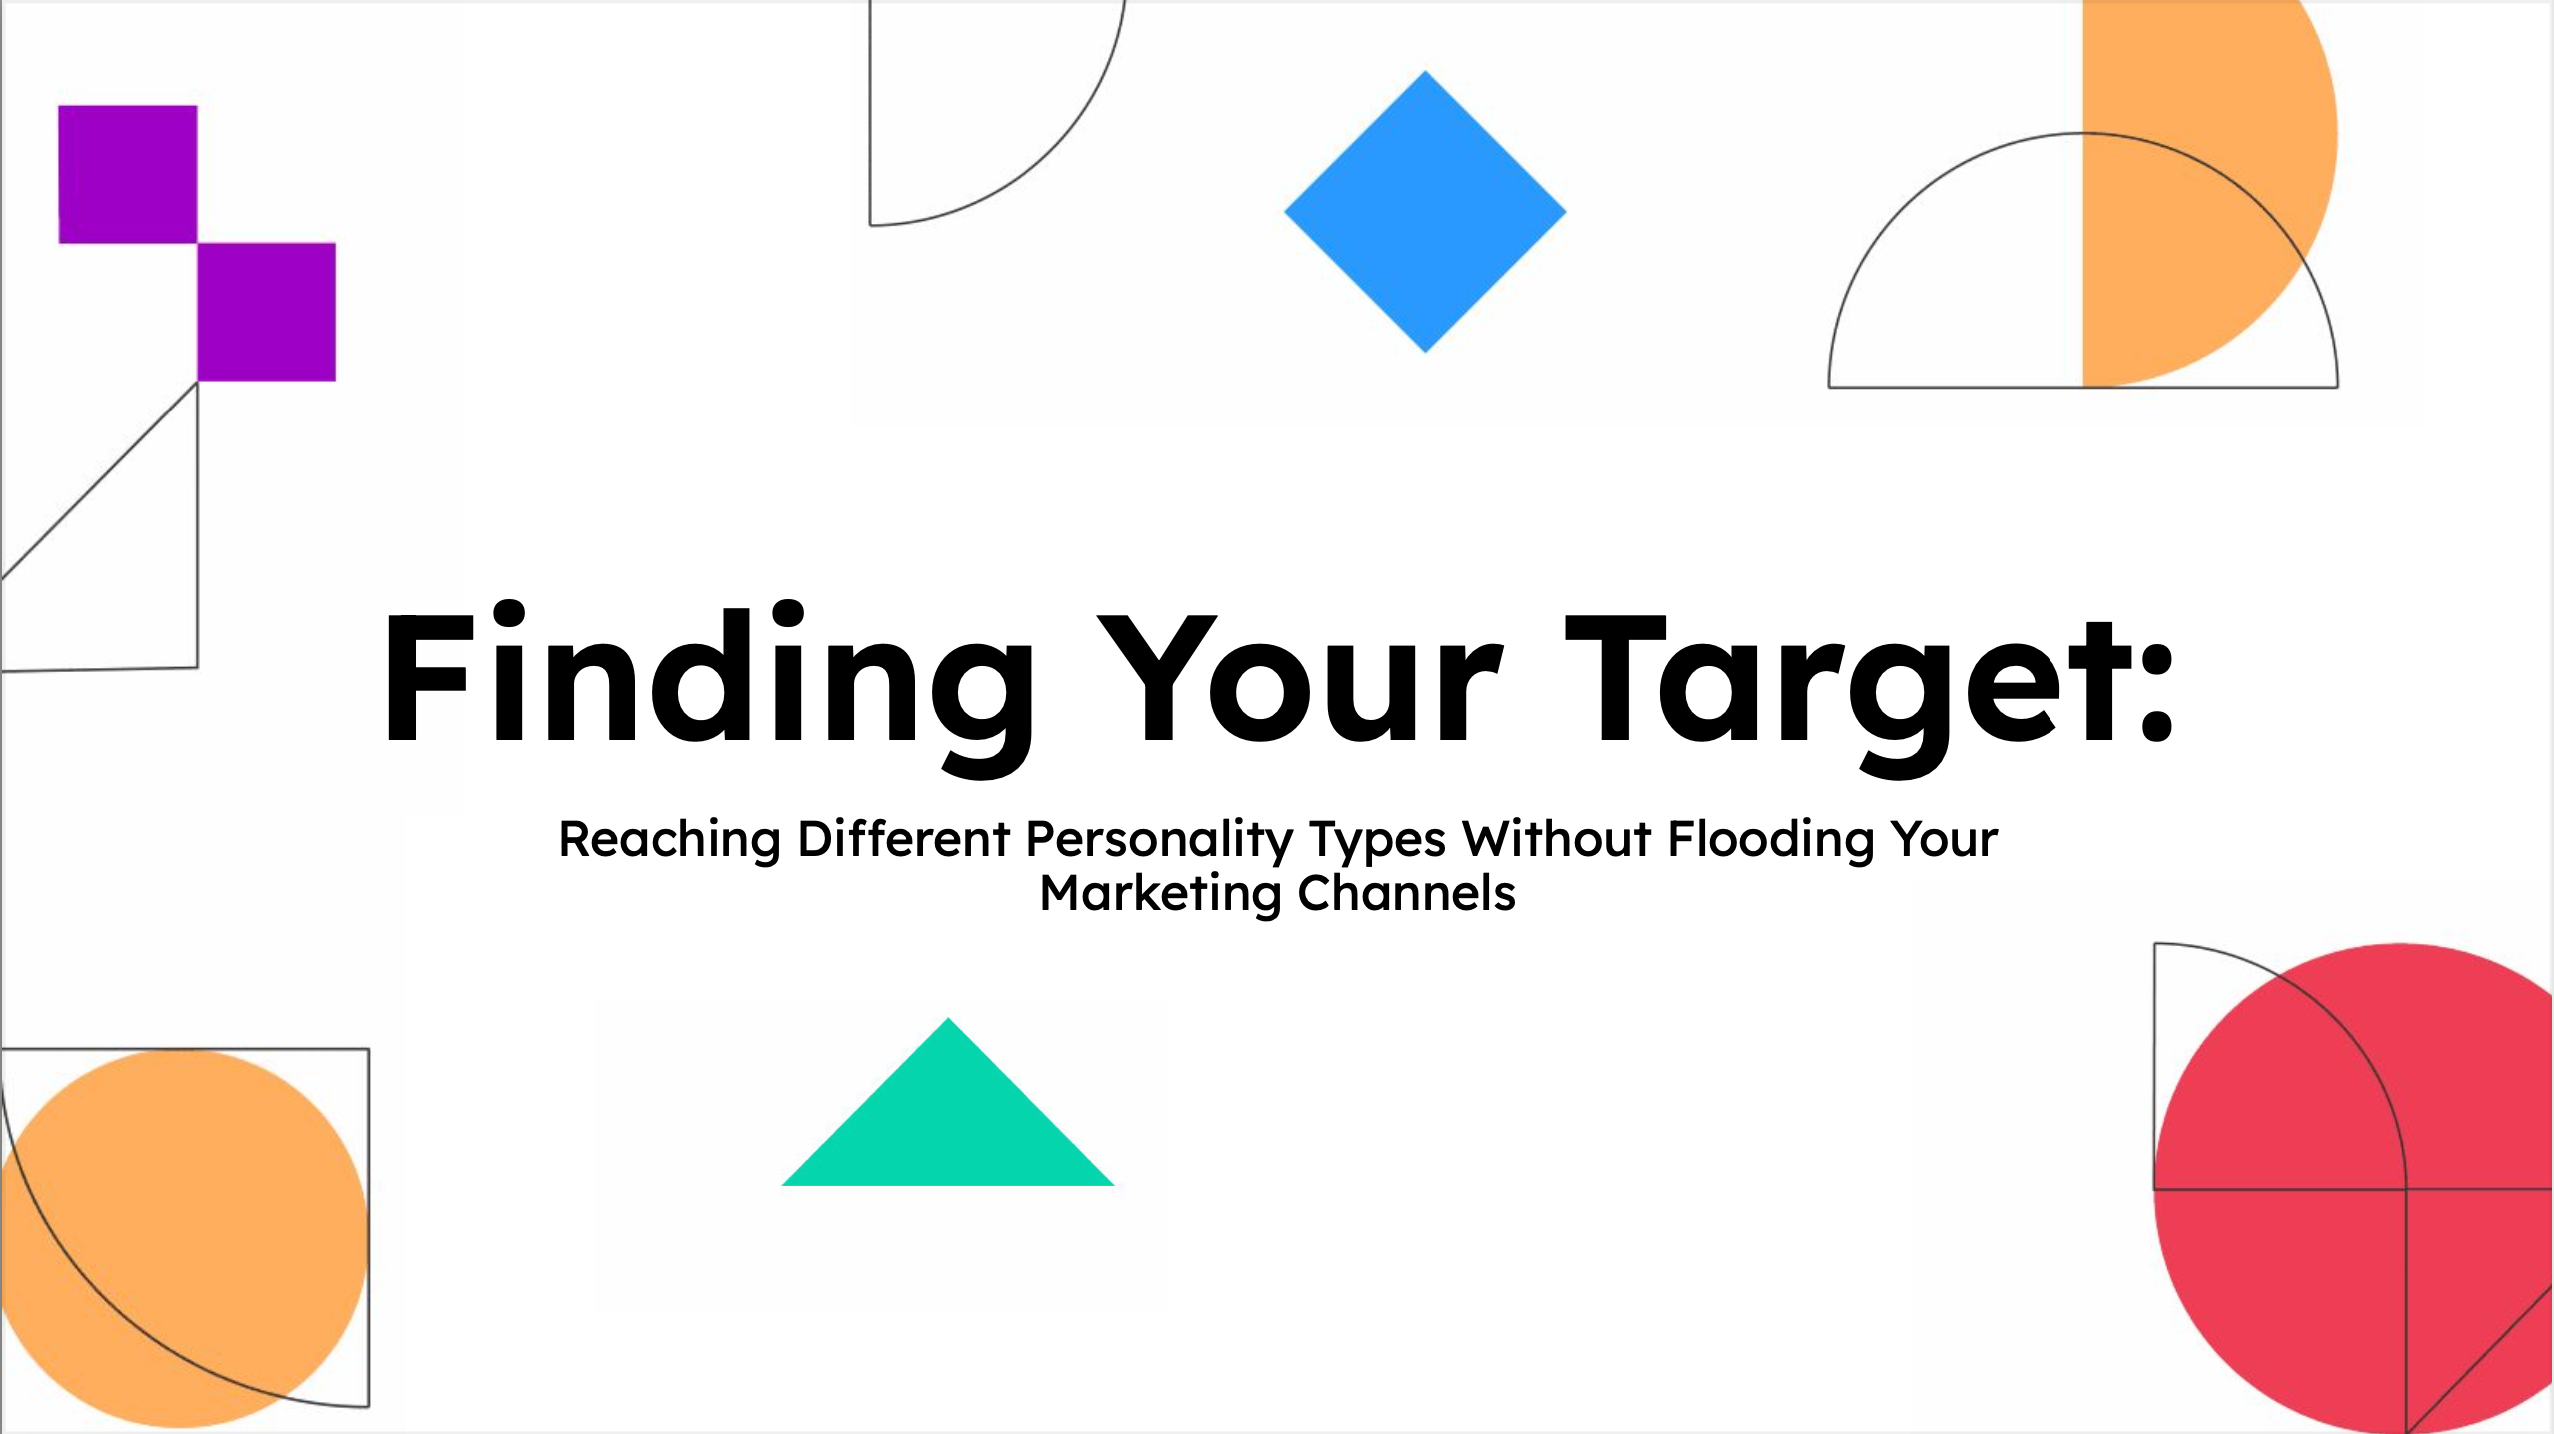 Find Your Target: Reaching Different Personality Types Without Flooding Your Marketing Channels